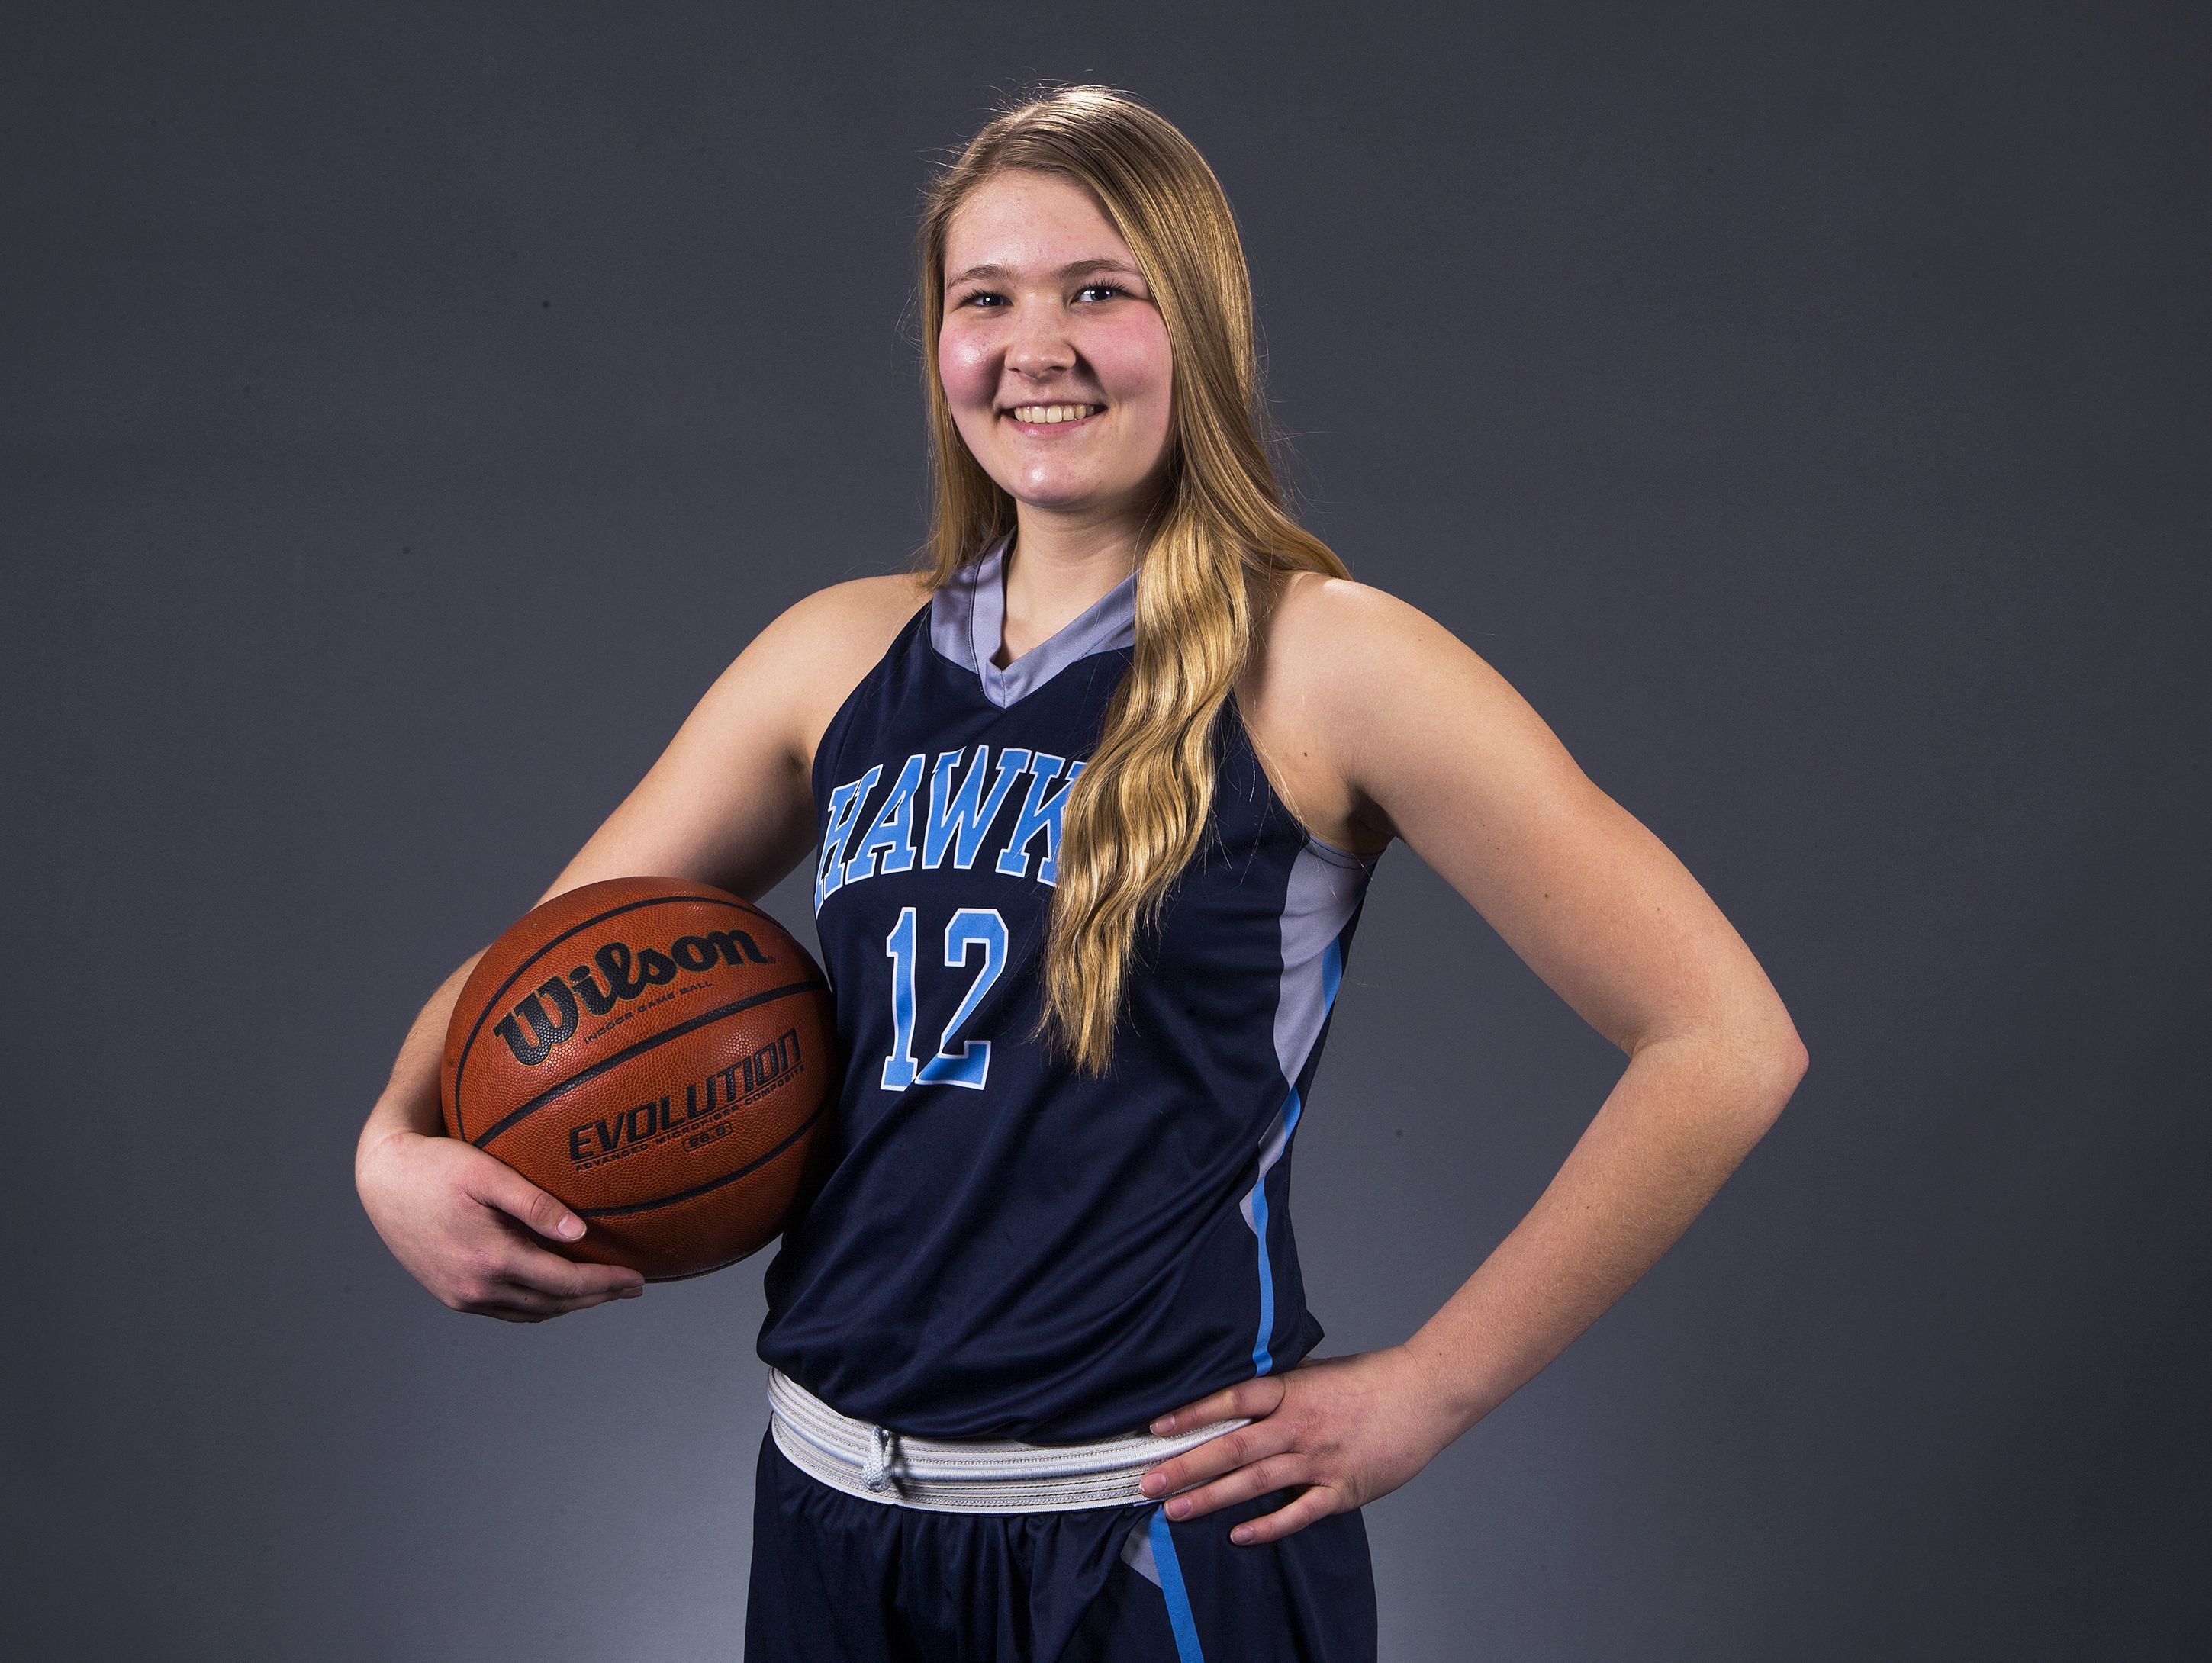 Tucson The Gregory School senior forward Taylor Thompson is a finalist for the azcentral.com Sports Awards Small Schools Girls Basketball Athlete of the Year award.